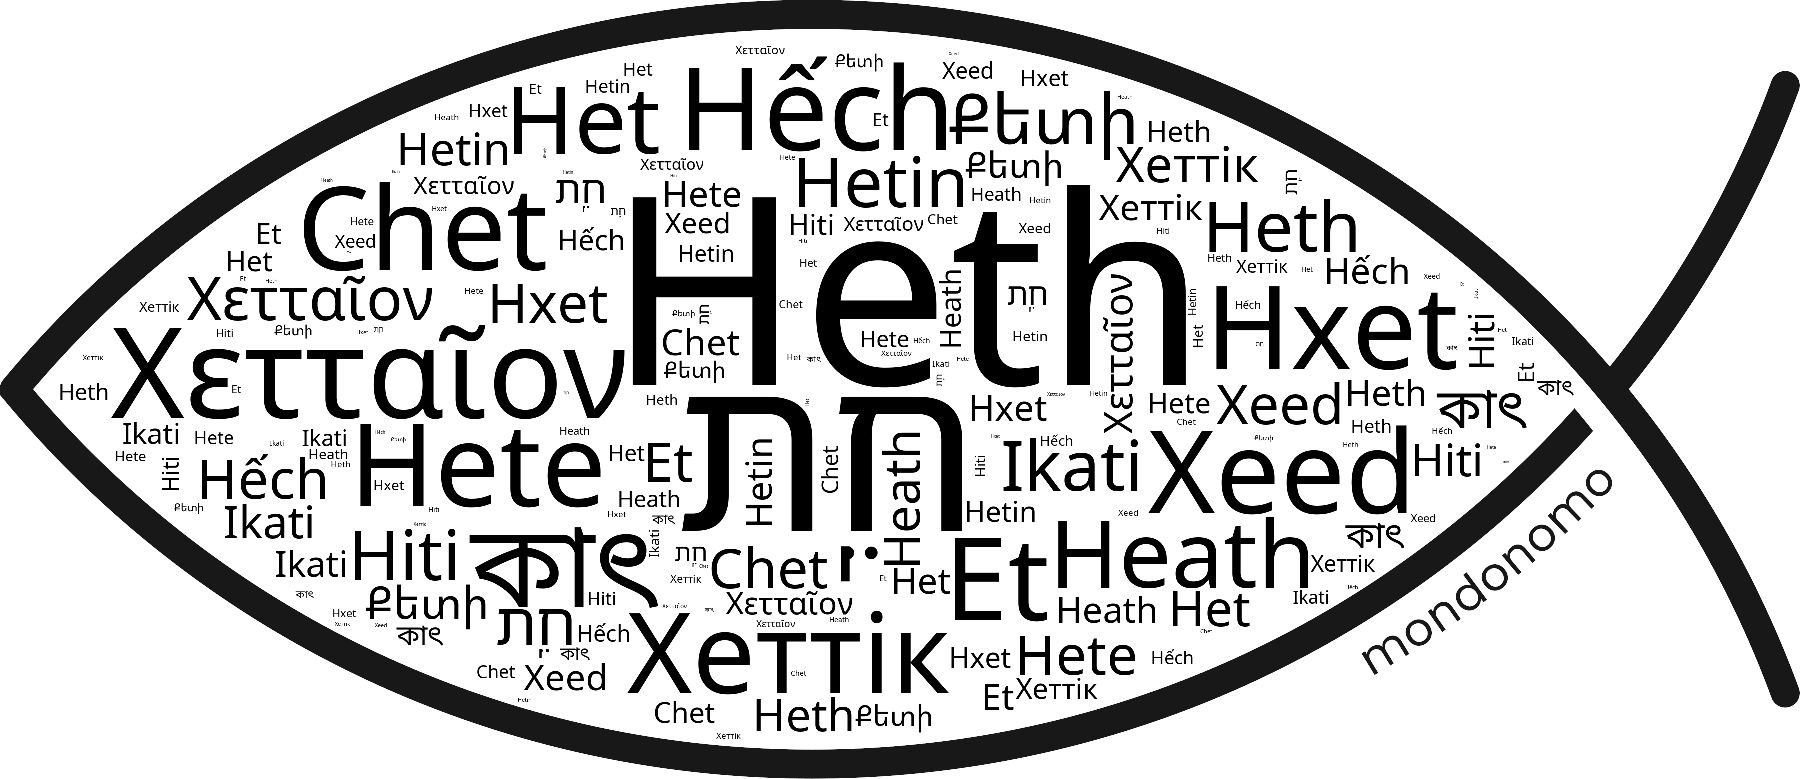 Name Heth in the world's Bibles